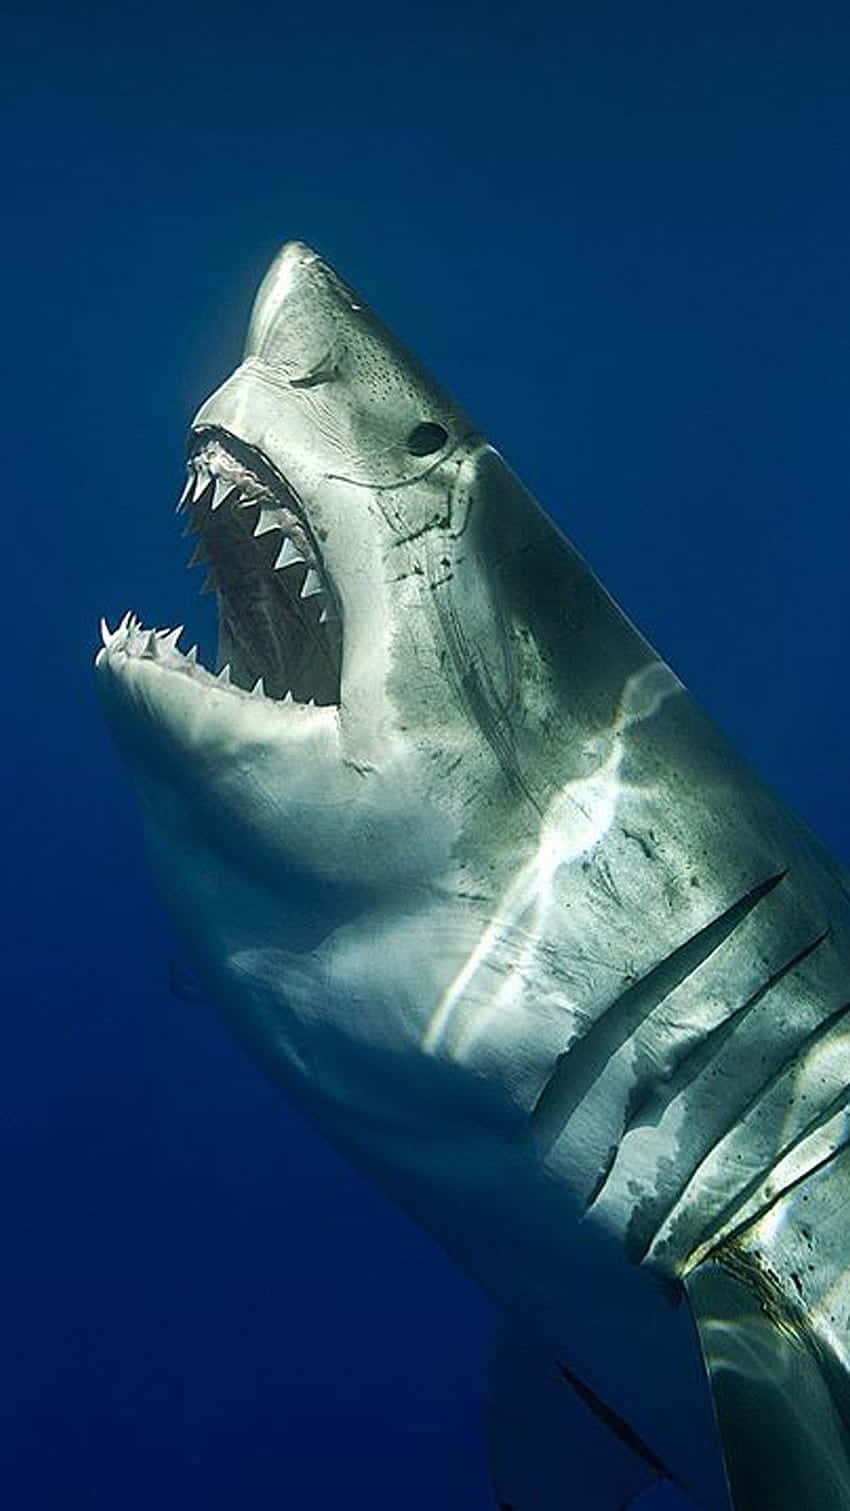 Dive into Fun with the Shark iPhone Wallpaper